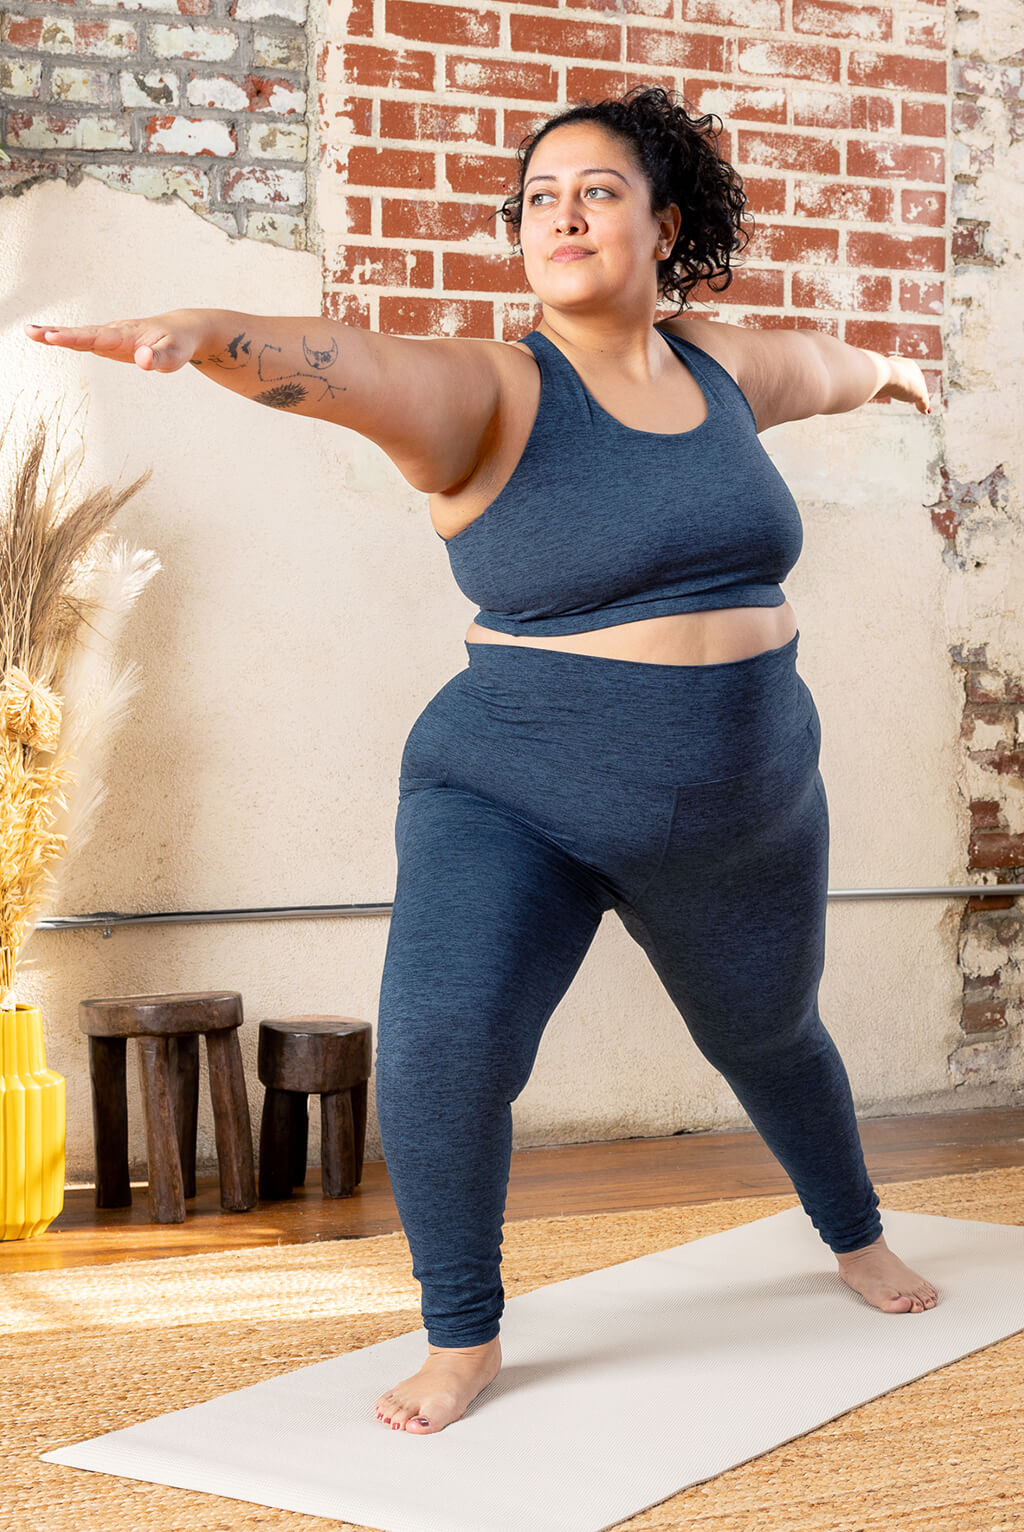 Plus size model posing in Yoga Studio wearing Superfit Hero SuperSoft skort and strappy bra in Heathered Navy